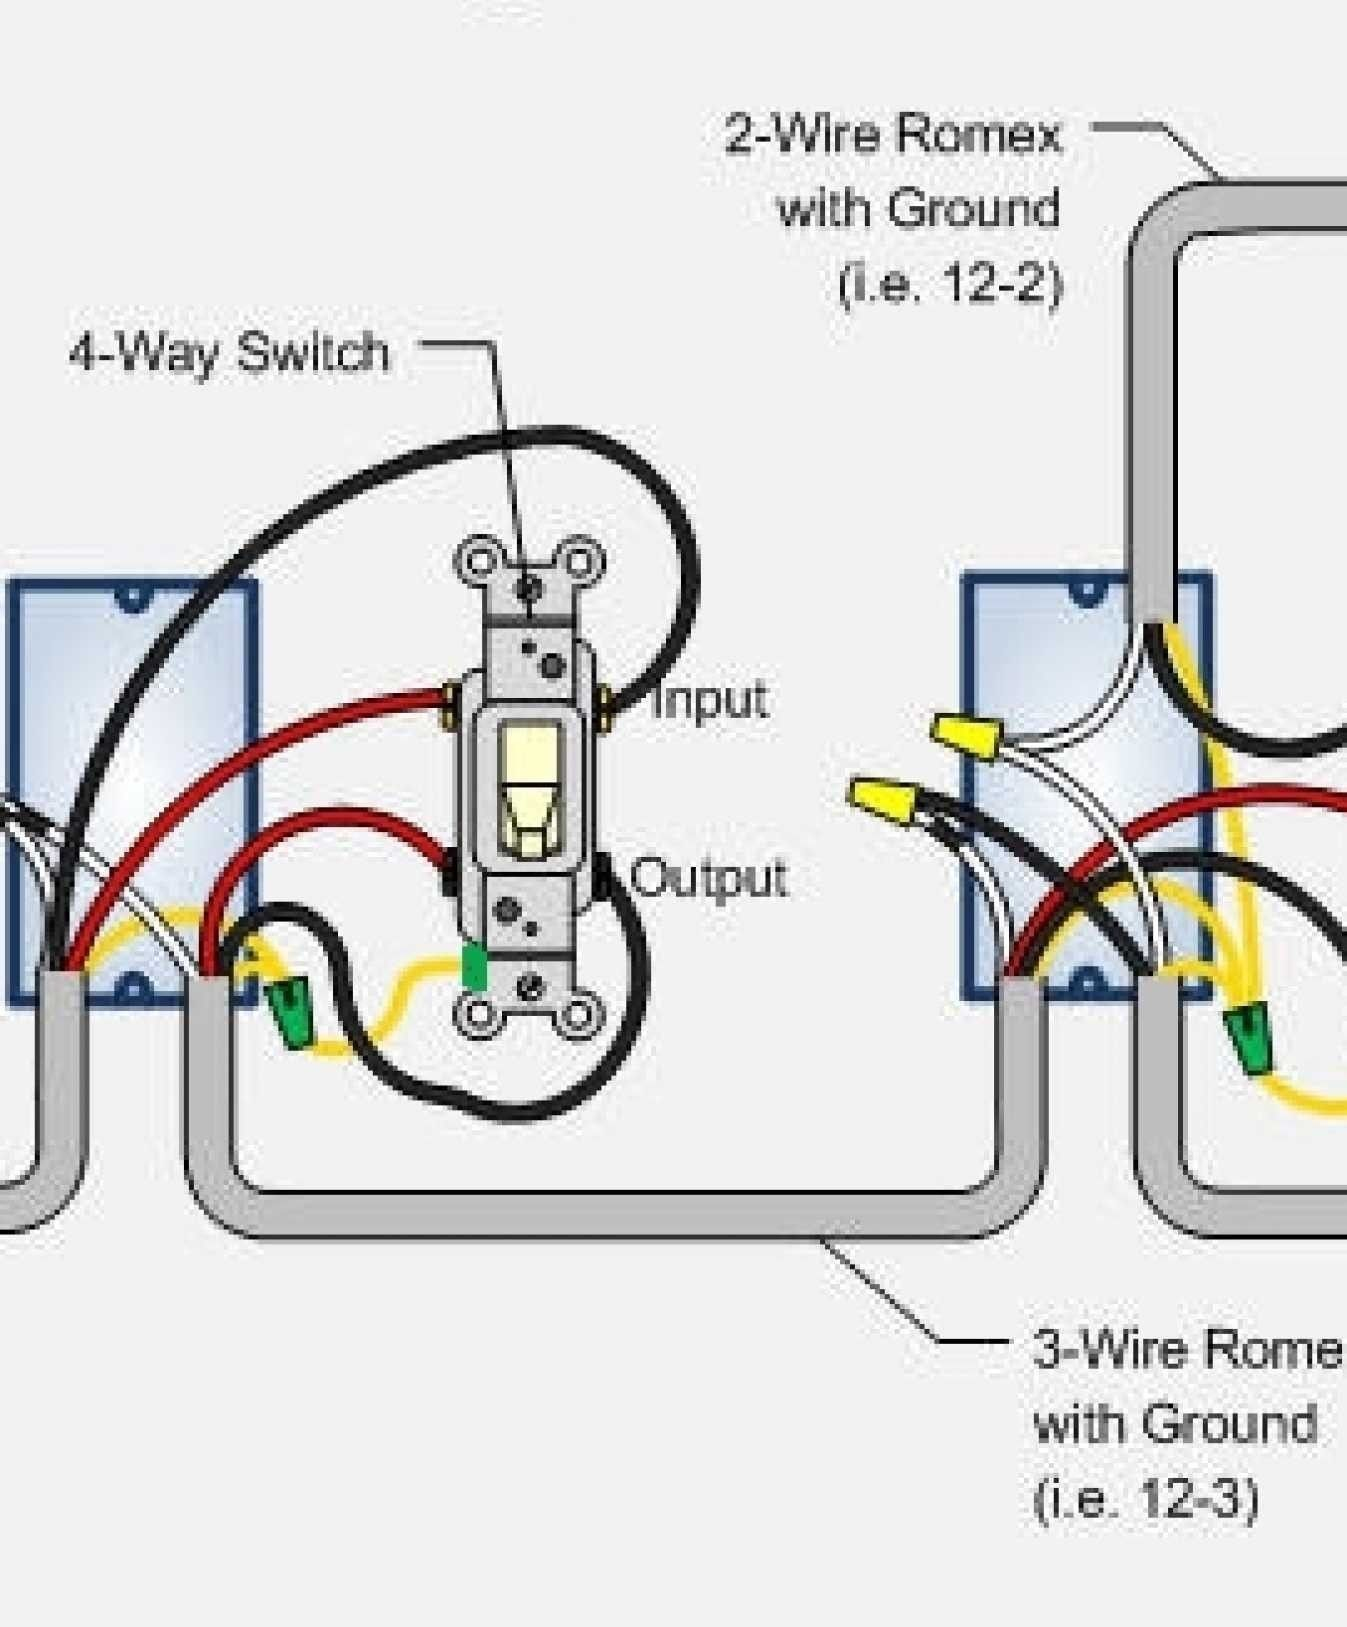 Unique Light Switch Connection Diagram #diagram | Wiring Diagram For Light Switch